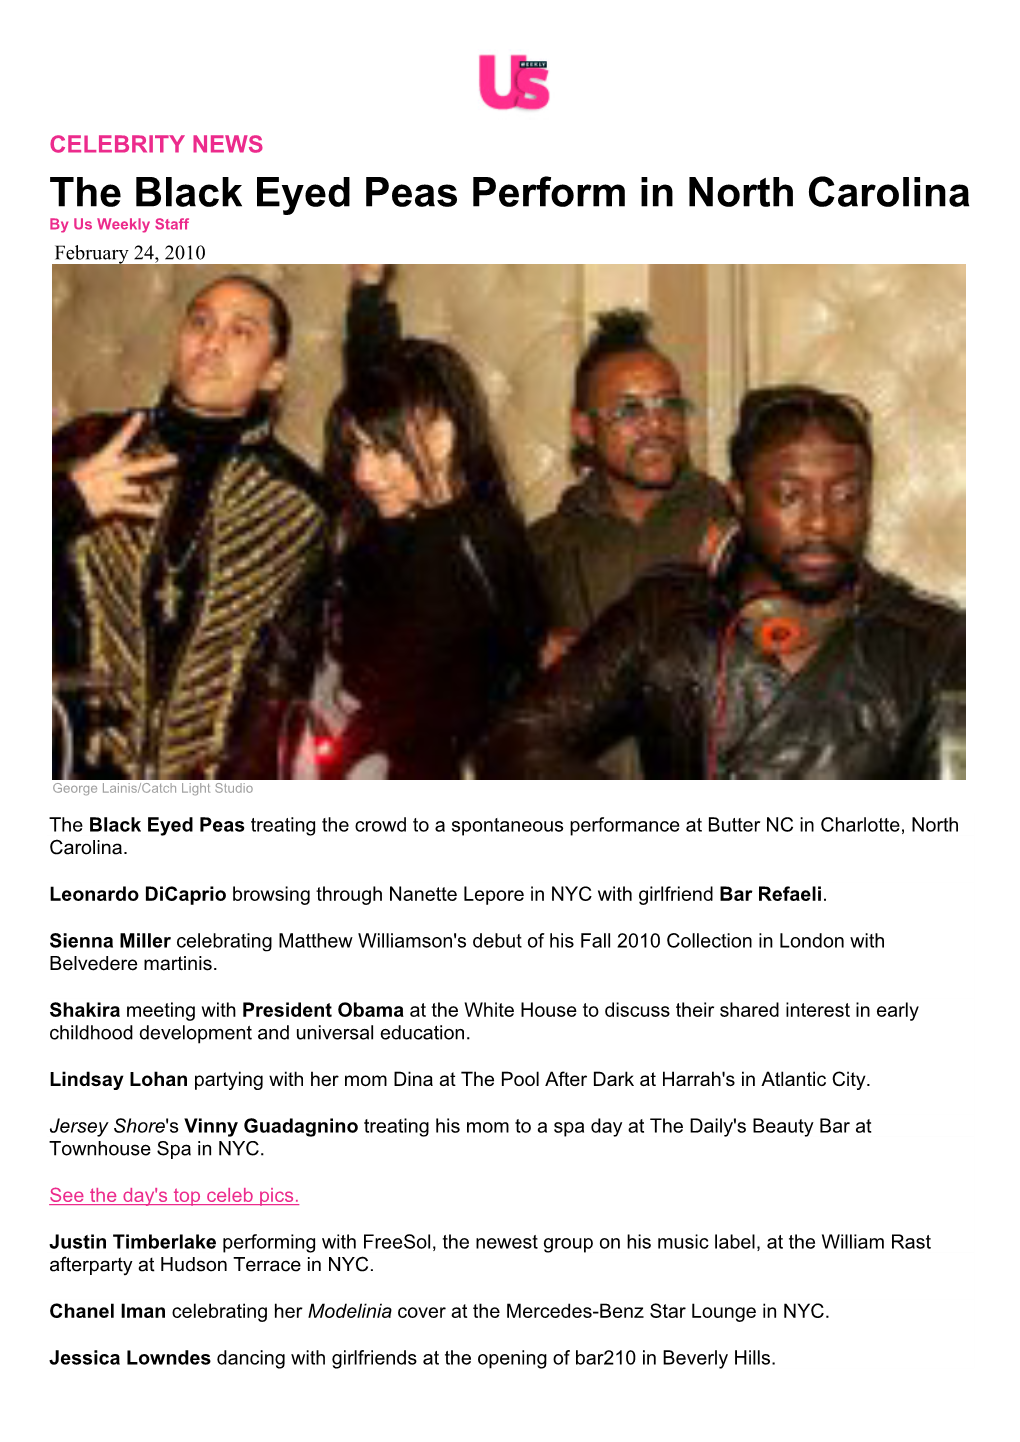 The Black Eyed Peas Perform in North Carolina by Us Weekly Staff February 24, 2010